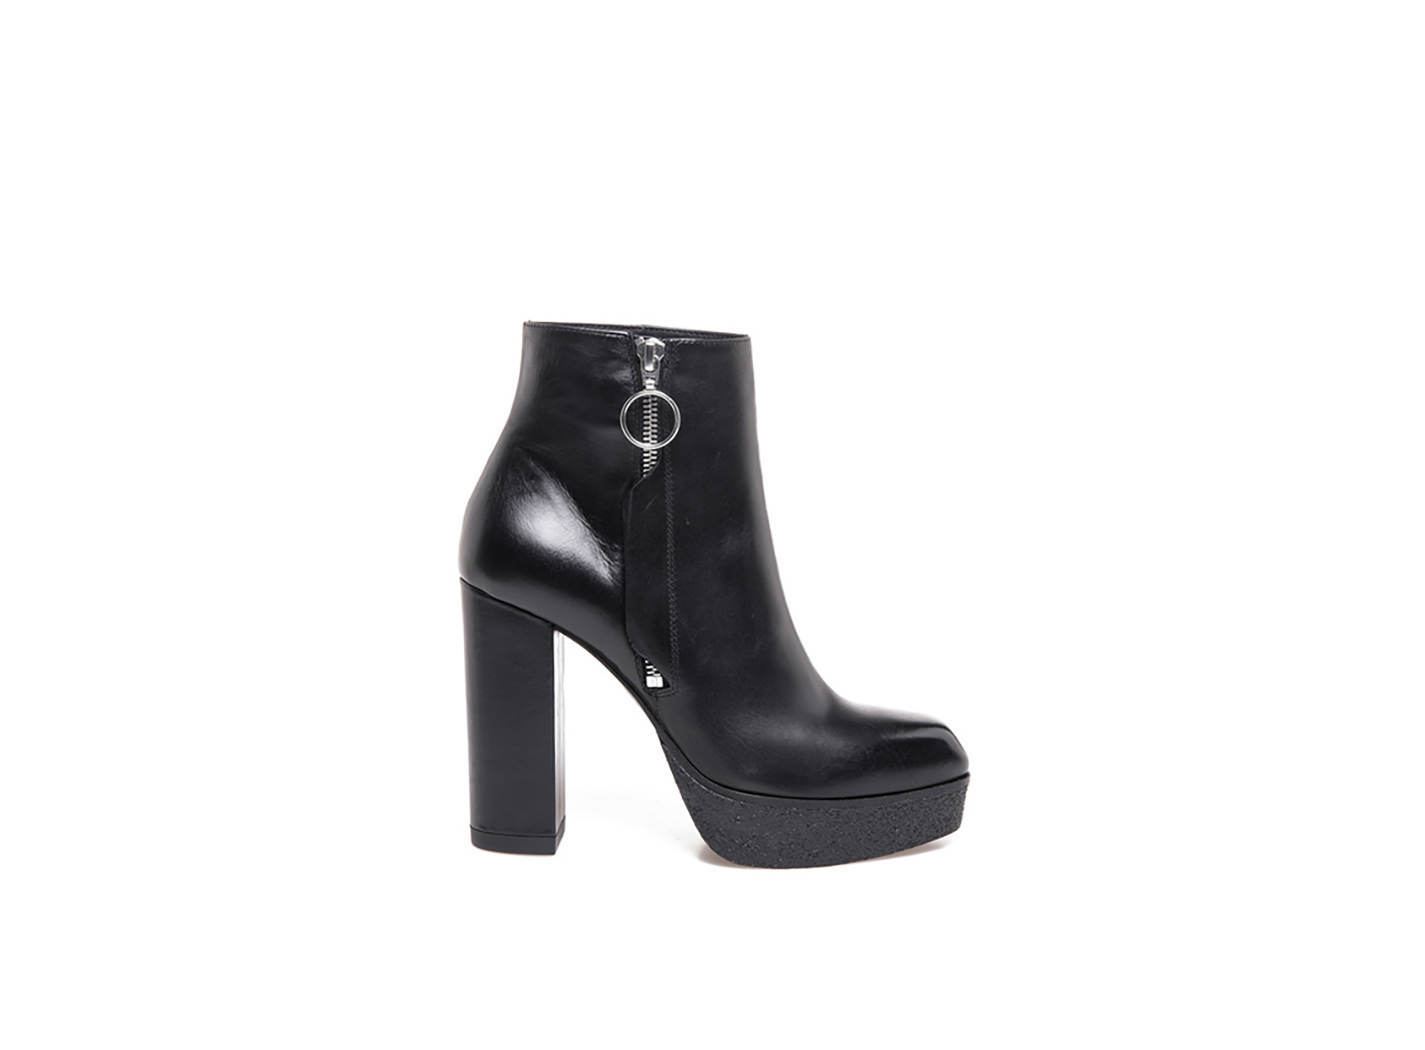 shiny black leather ankle boots